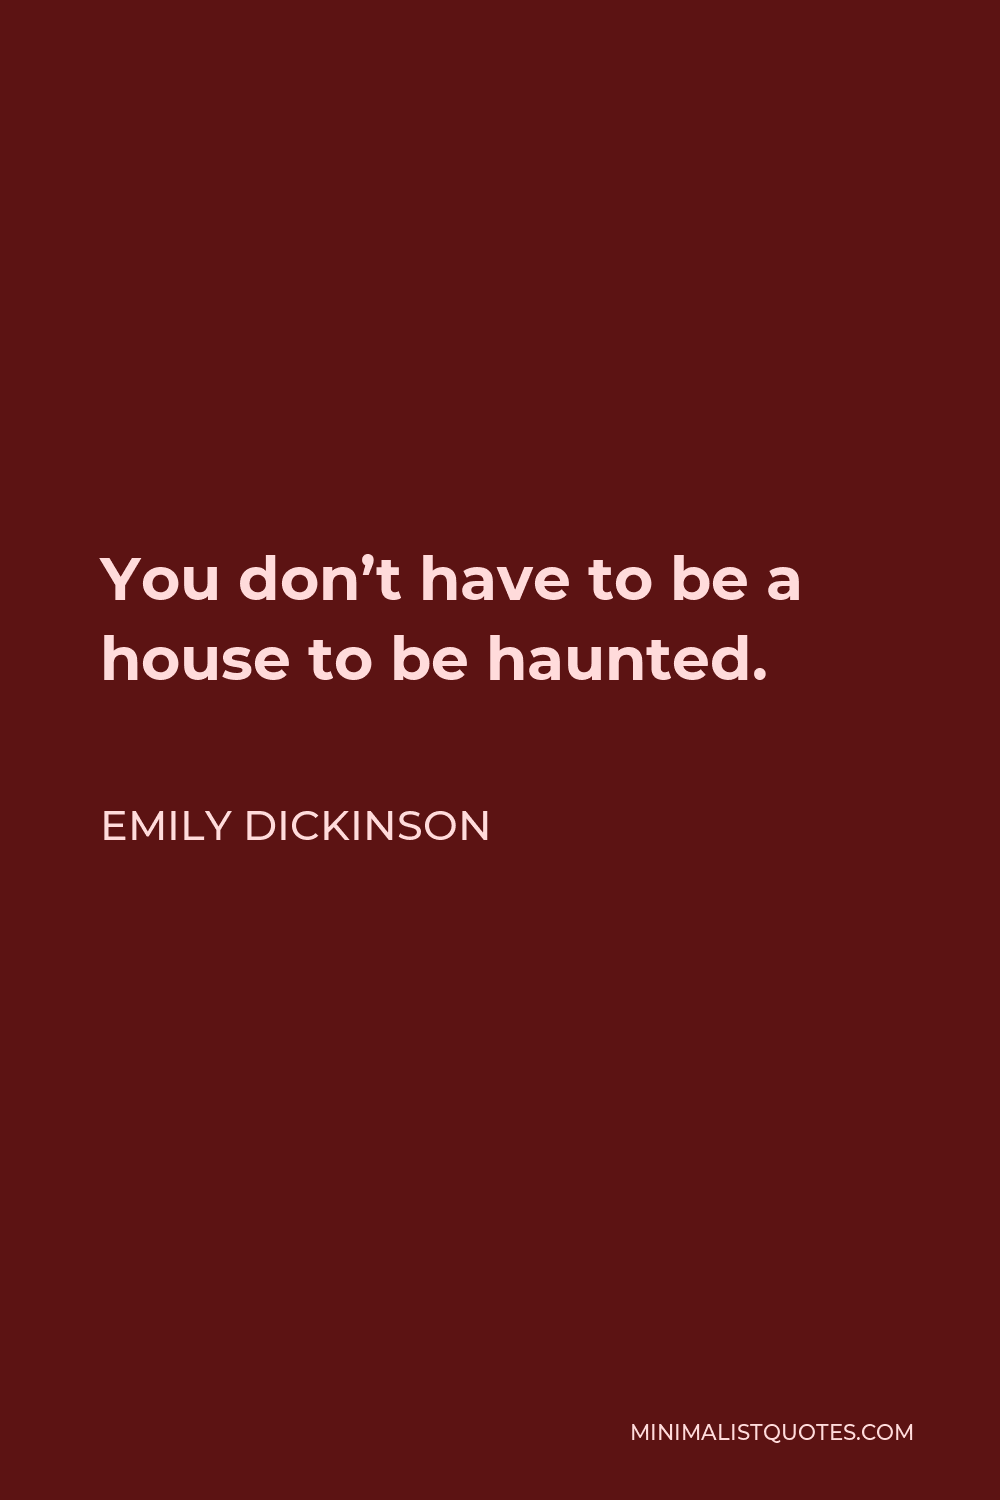 Emily Dickinson Quote - You don’t have to be a house to be haunted.